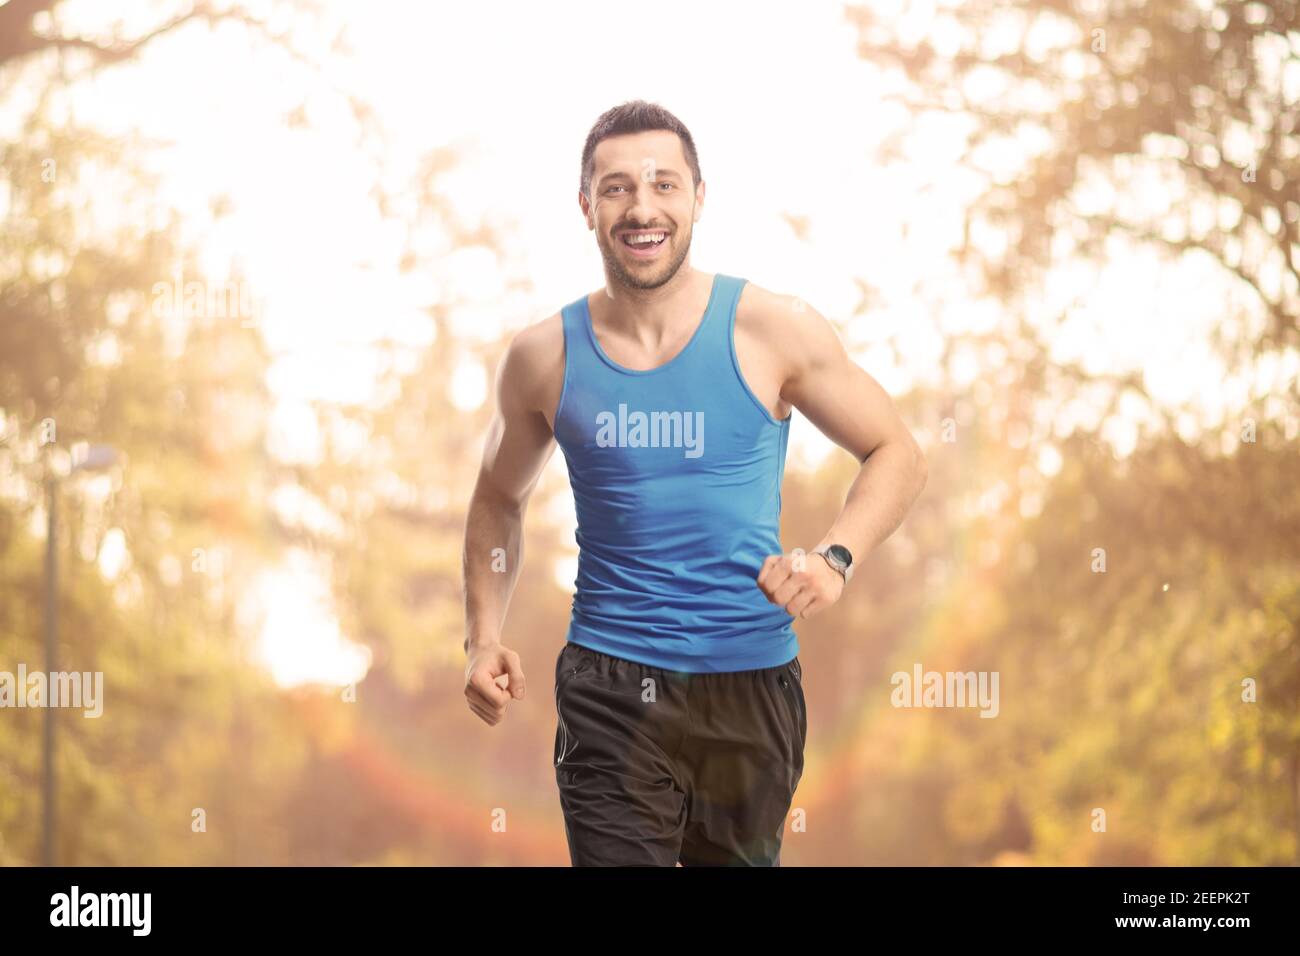 Young fit man running in a park Stock Photo